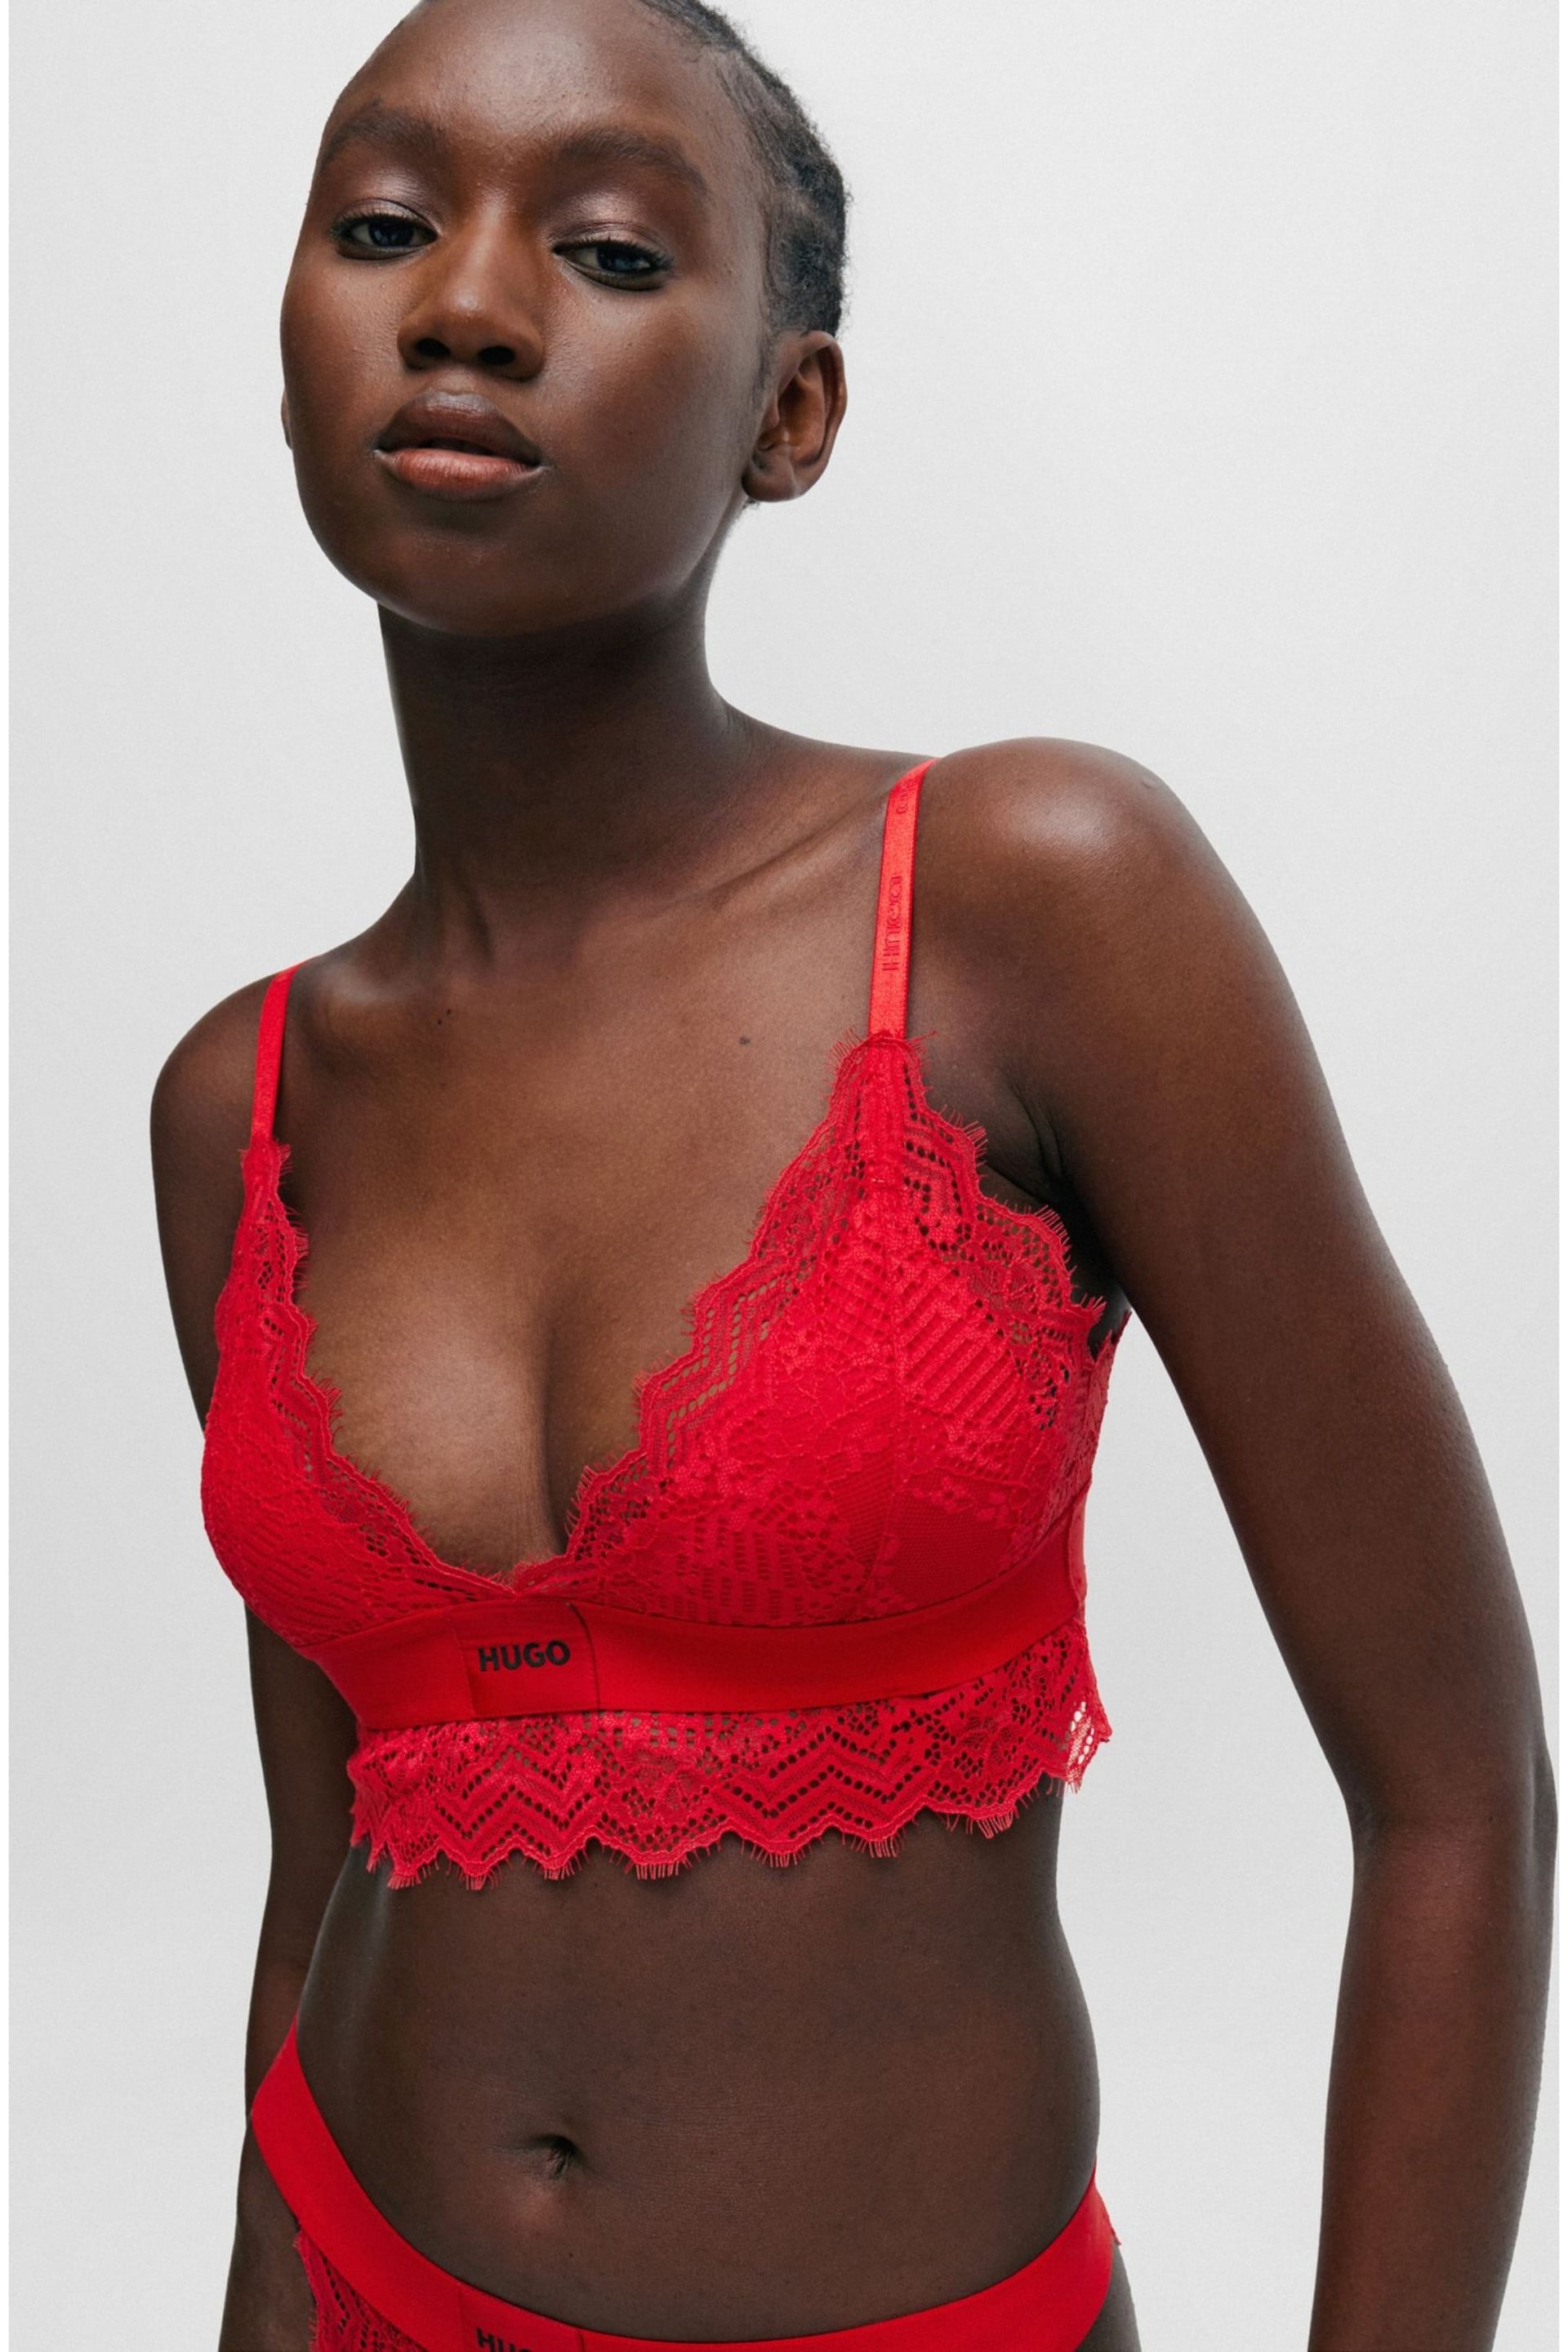 HUGO Red Padded Triangle Bra in Geometric Lace with Logo Label - Image 1 of 5